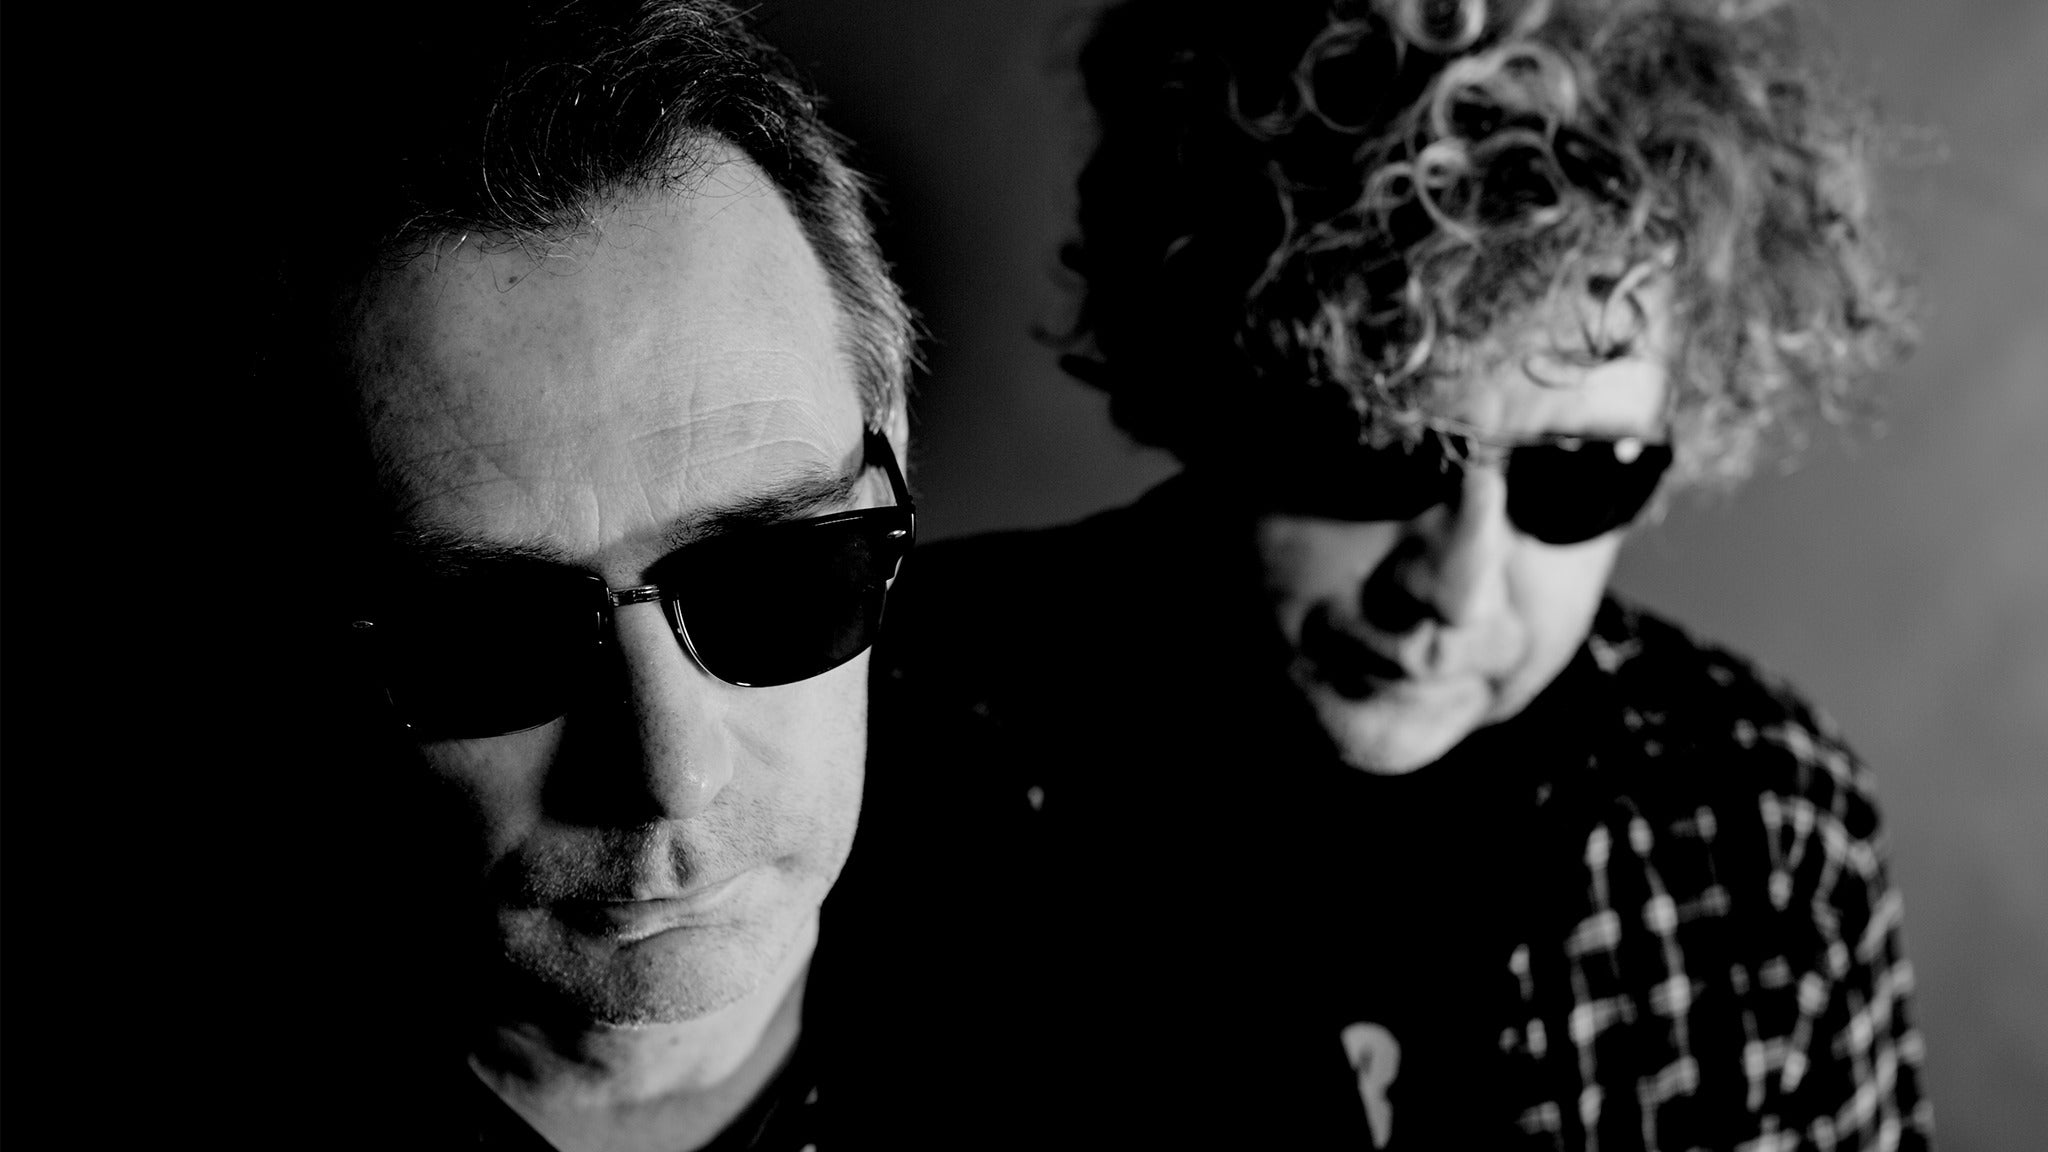 107.9 KBPI Presents The Jesus and Mary Chain - Denver, CO 80202